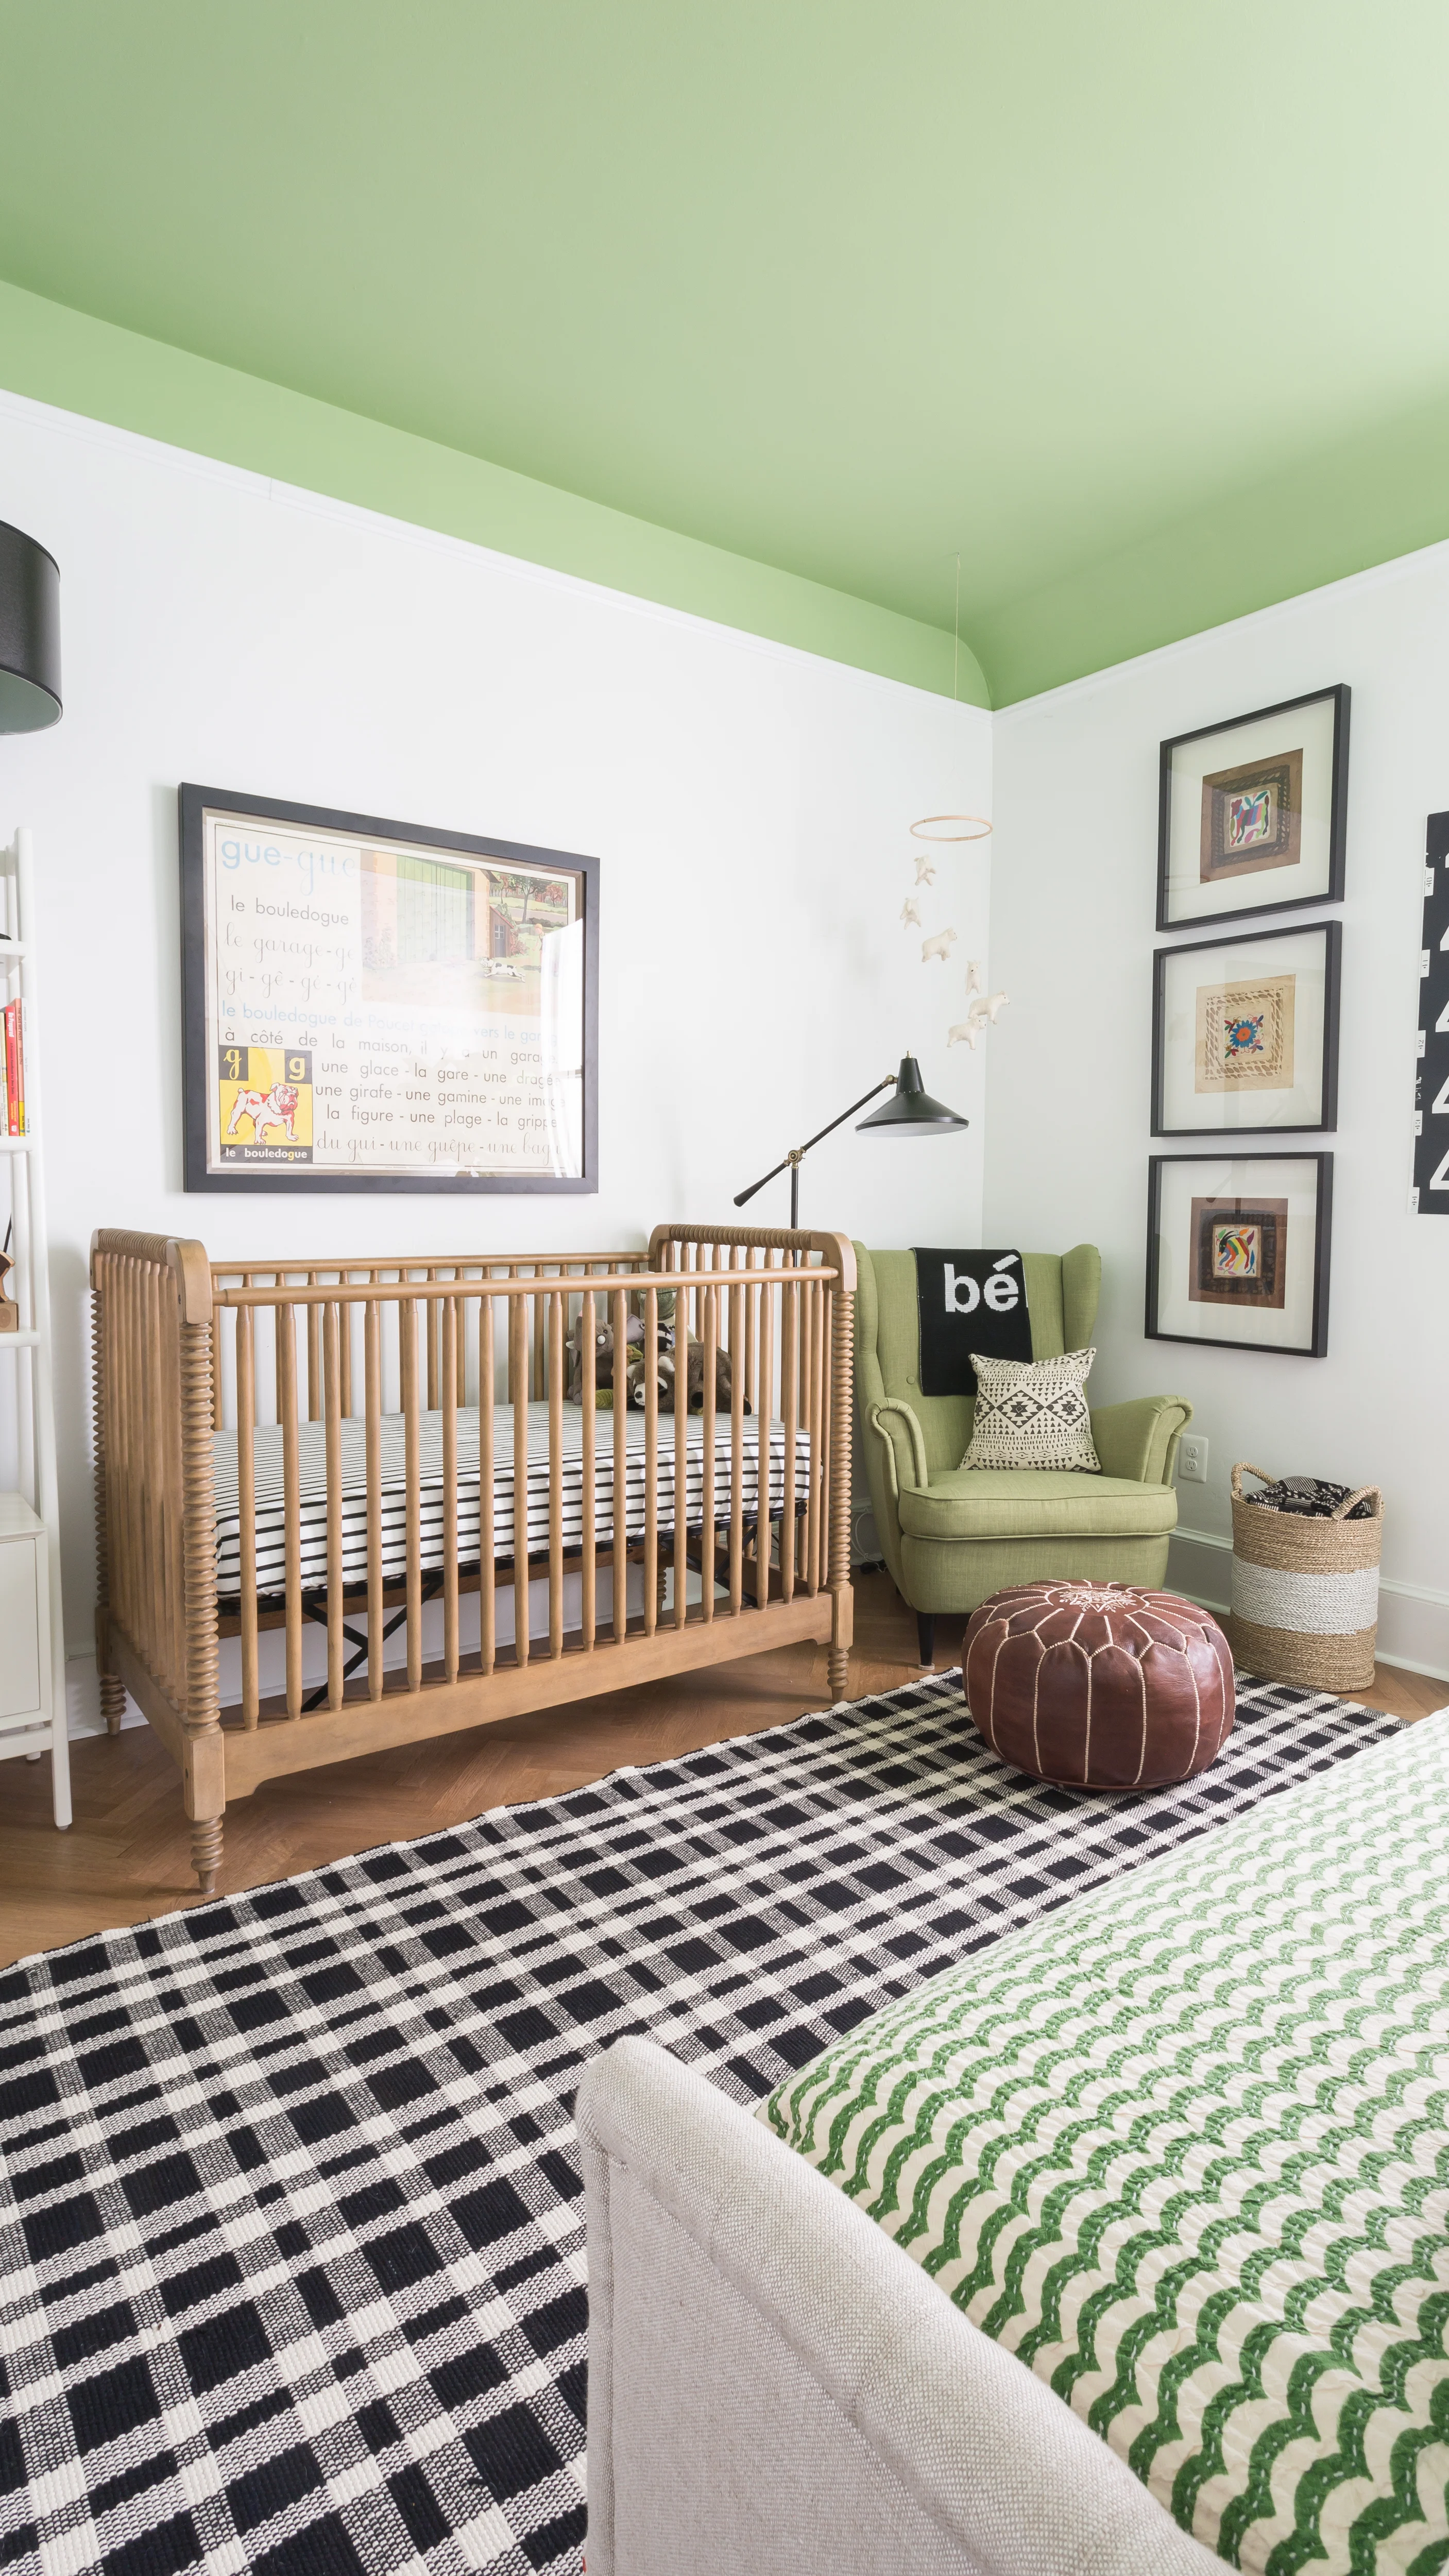 Black and White Nursery with Light Green Accents